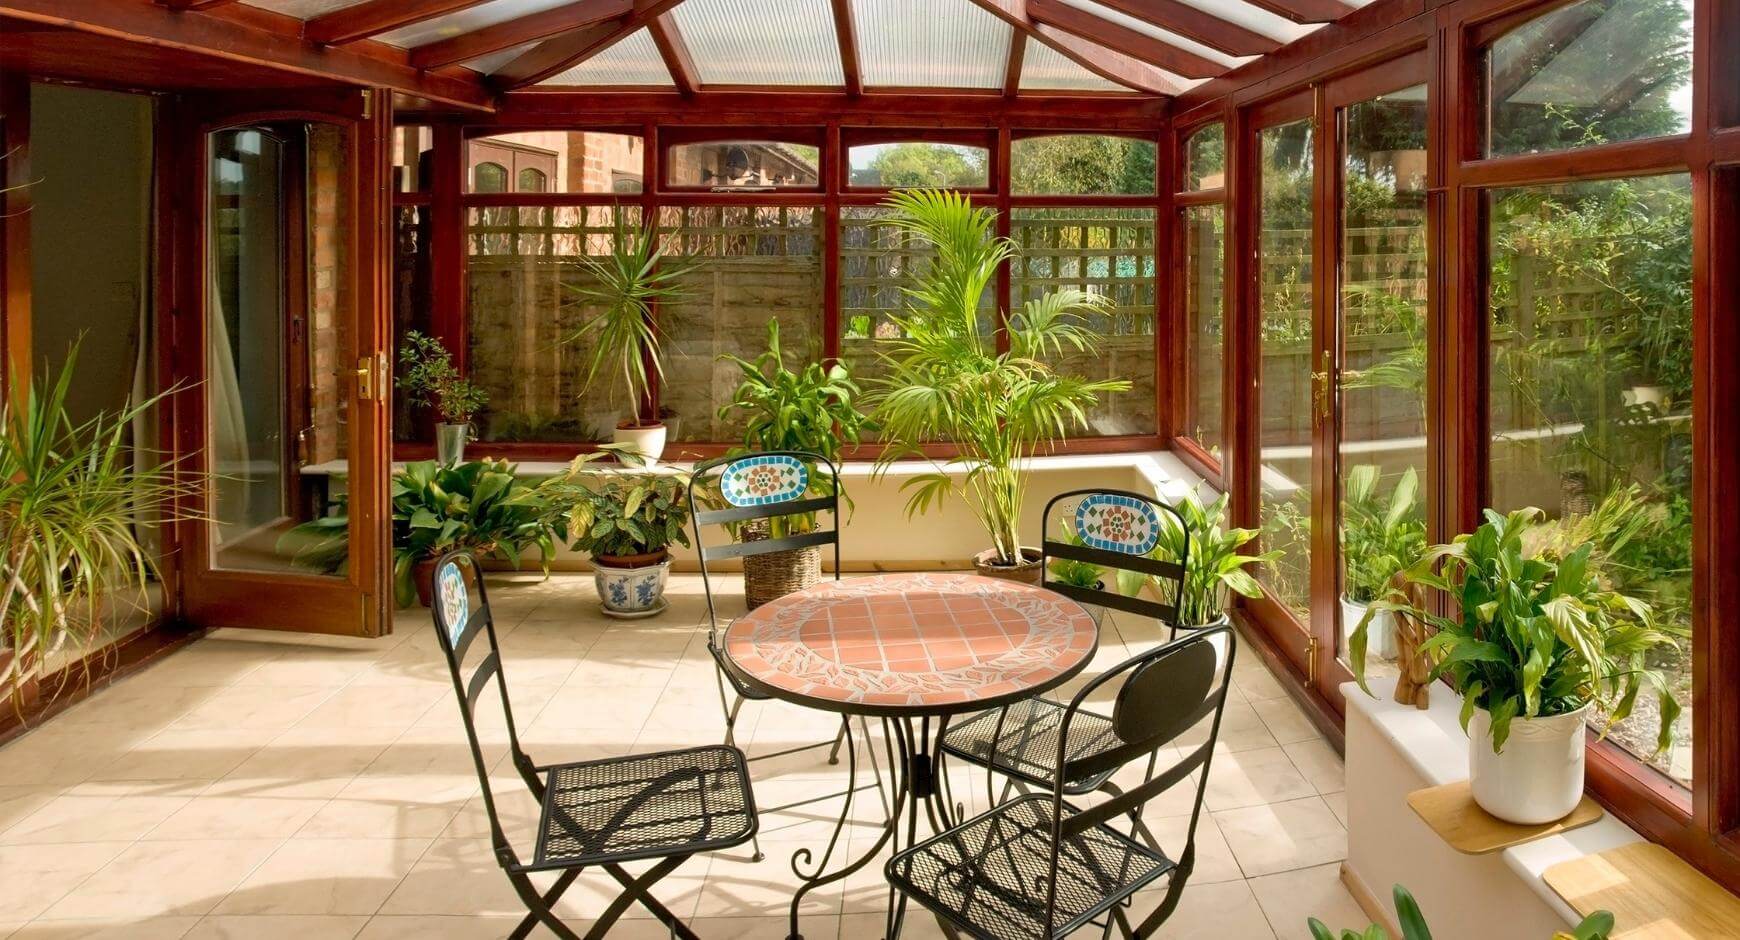 Glass sunroom filled with plants